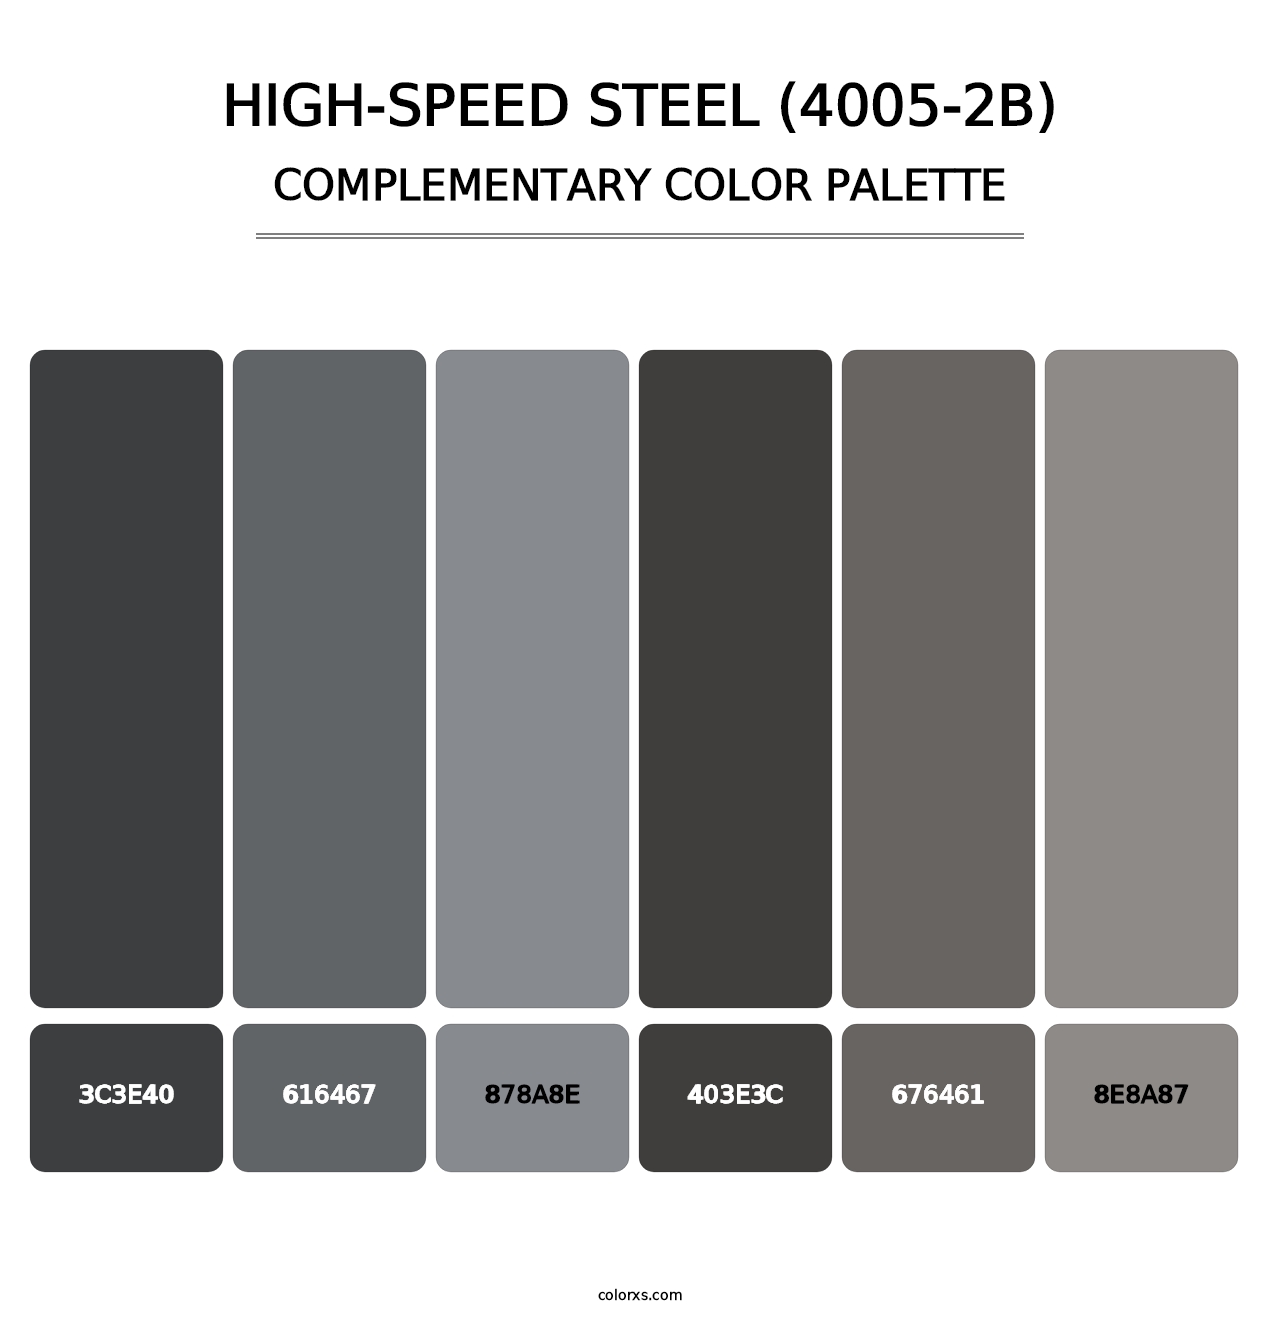 High-Speed Steel (4005-2B) - Complementary Color Palette